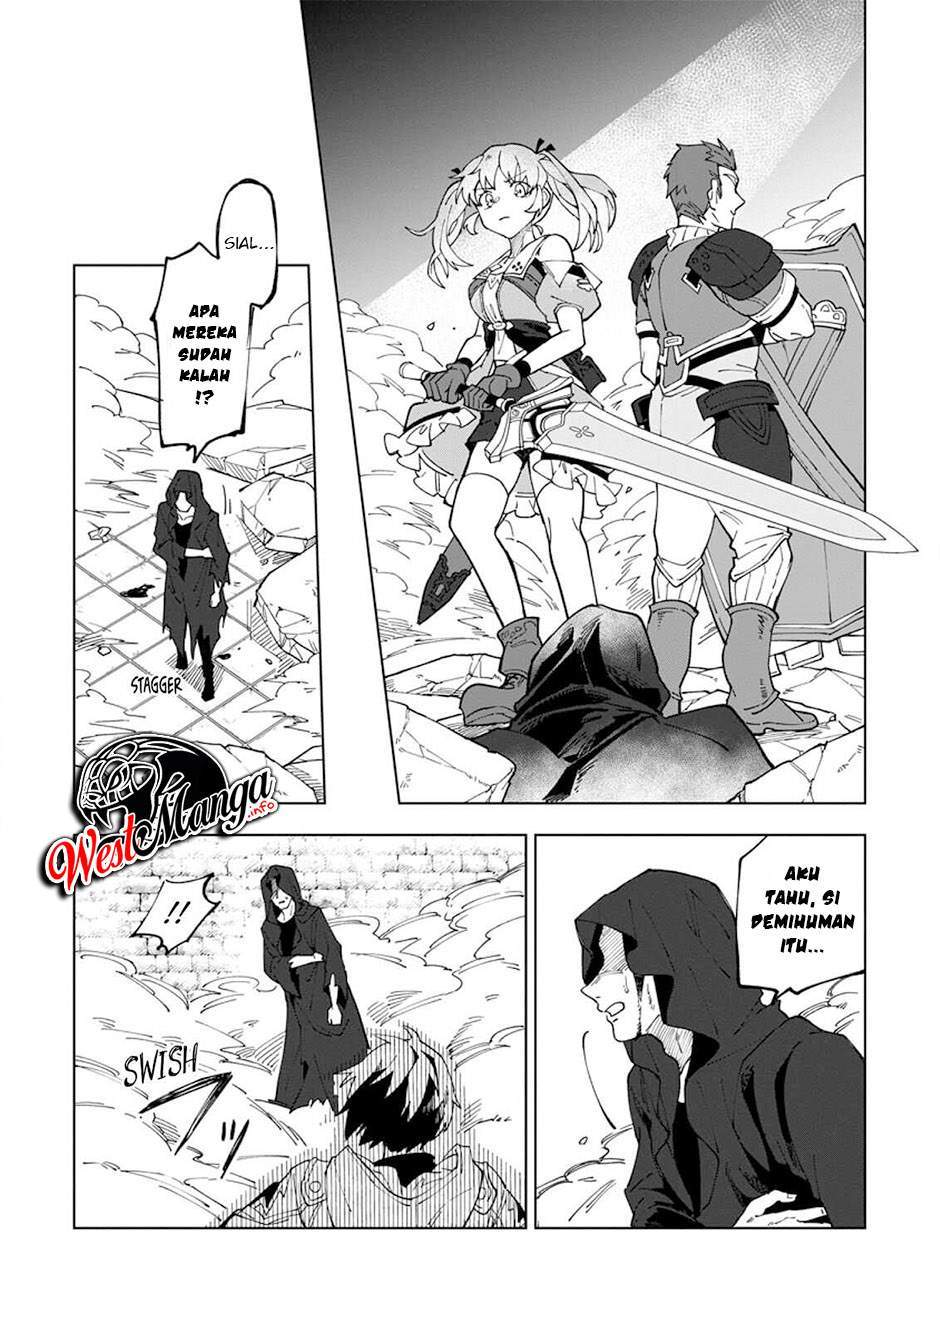 The White Mage Who Was Banished From the Hero’s Party Is Picked up by an S Rank Adventurer ~ This White Mage Is Too Out of the Ordinary! Chapter 06